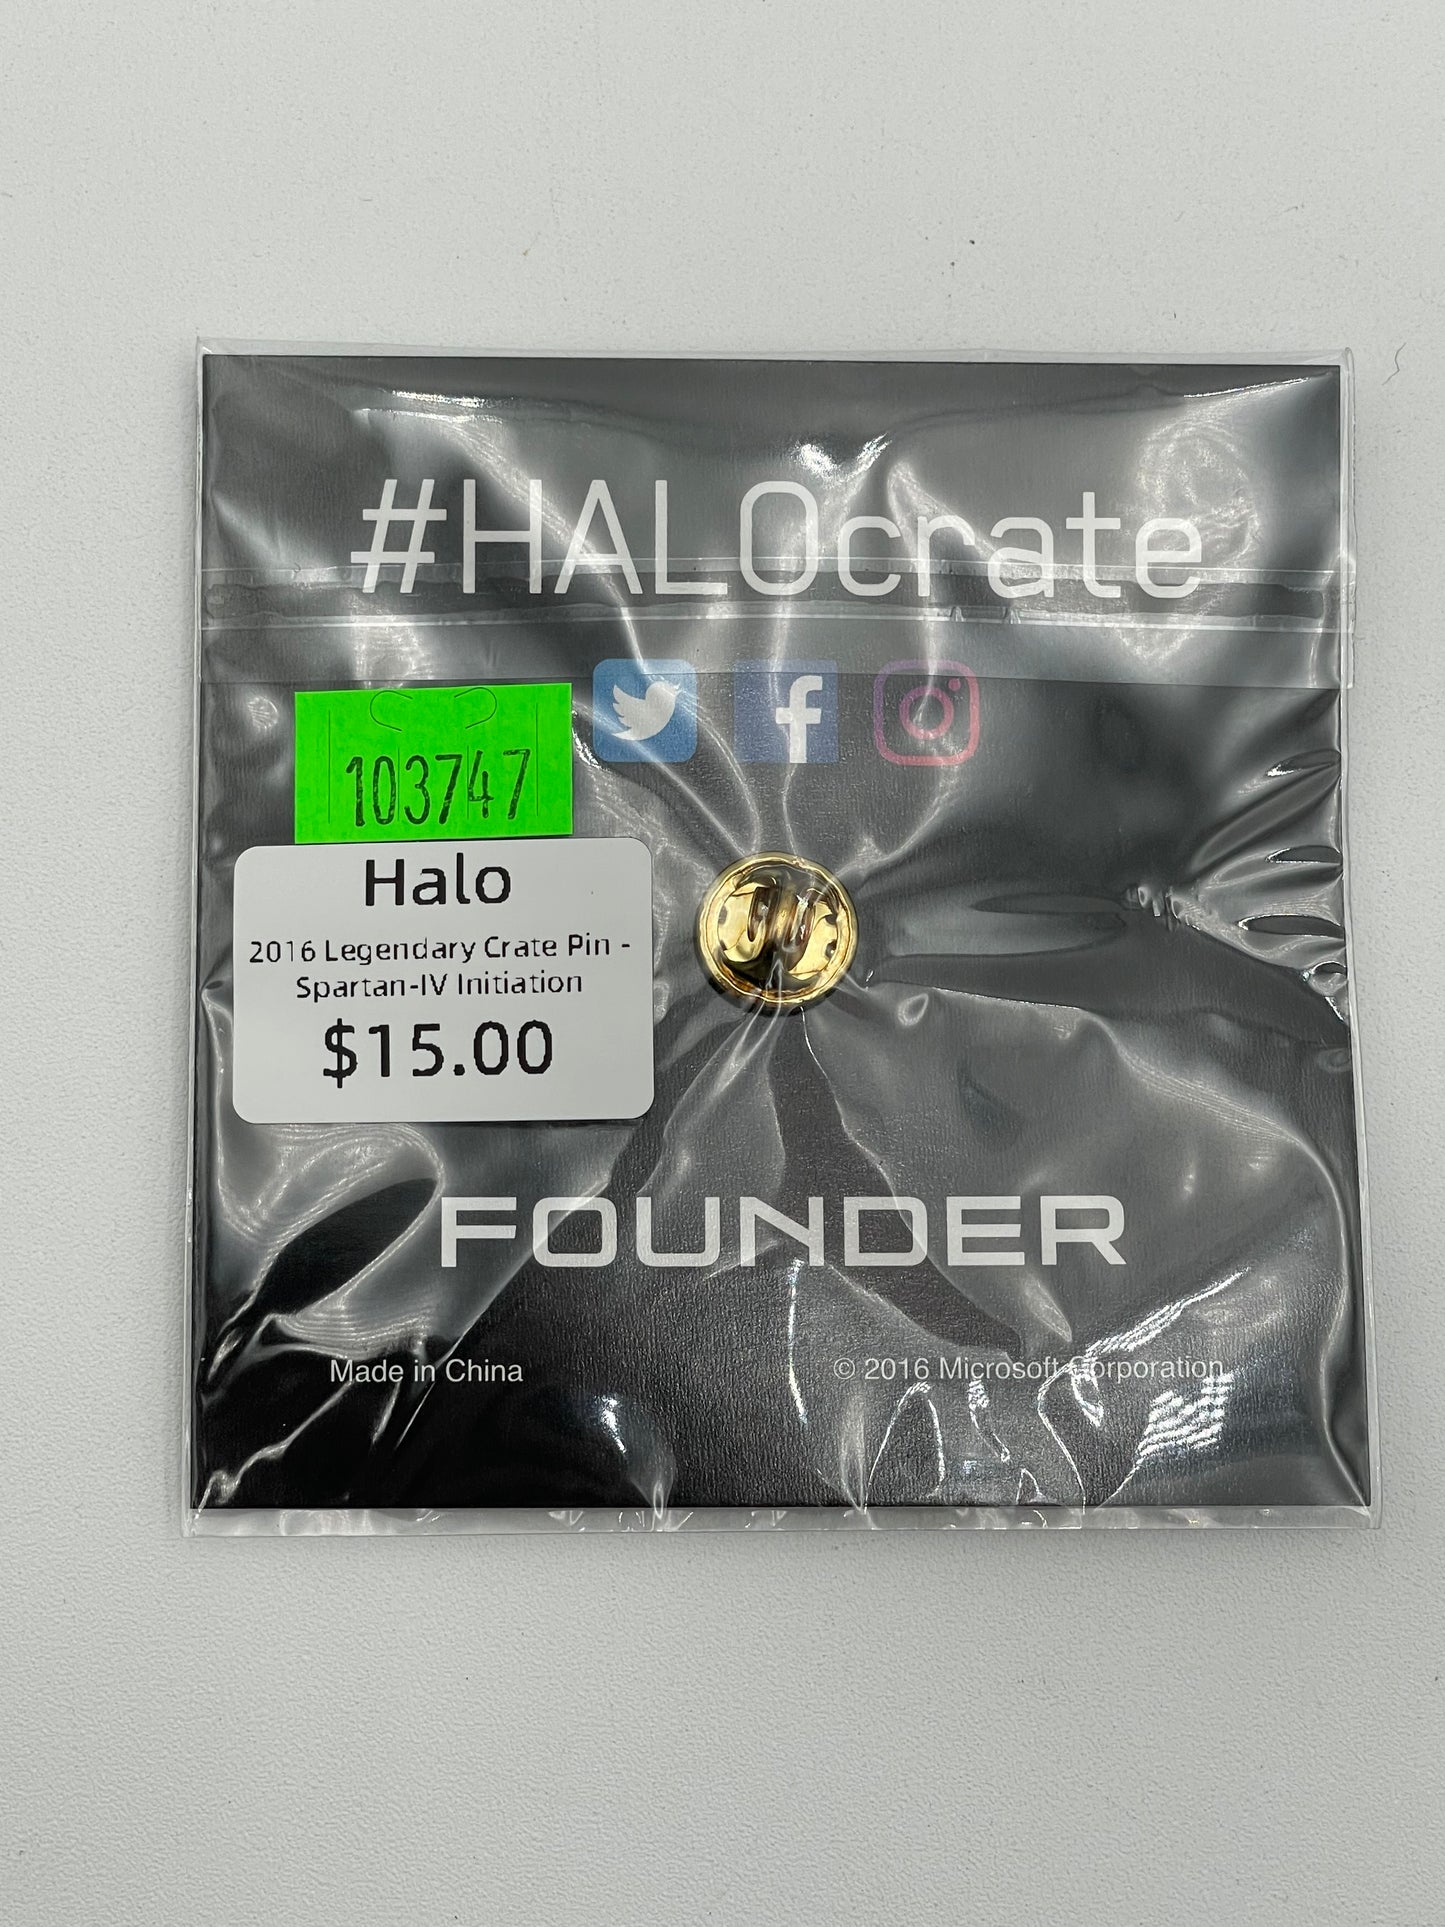 Halo - Legendary Crate Spartan IV Initiation Pin 2016 #103747